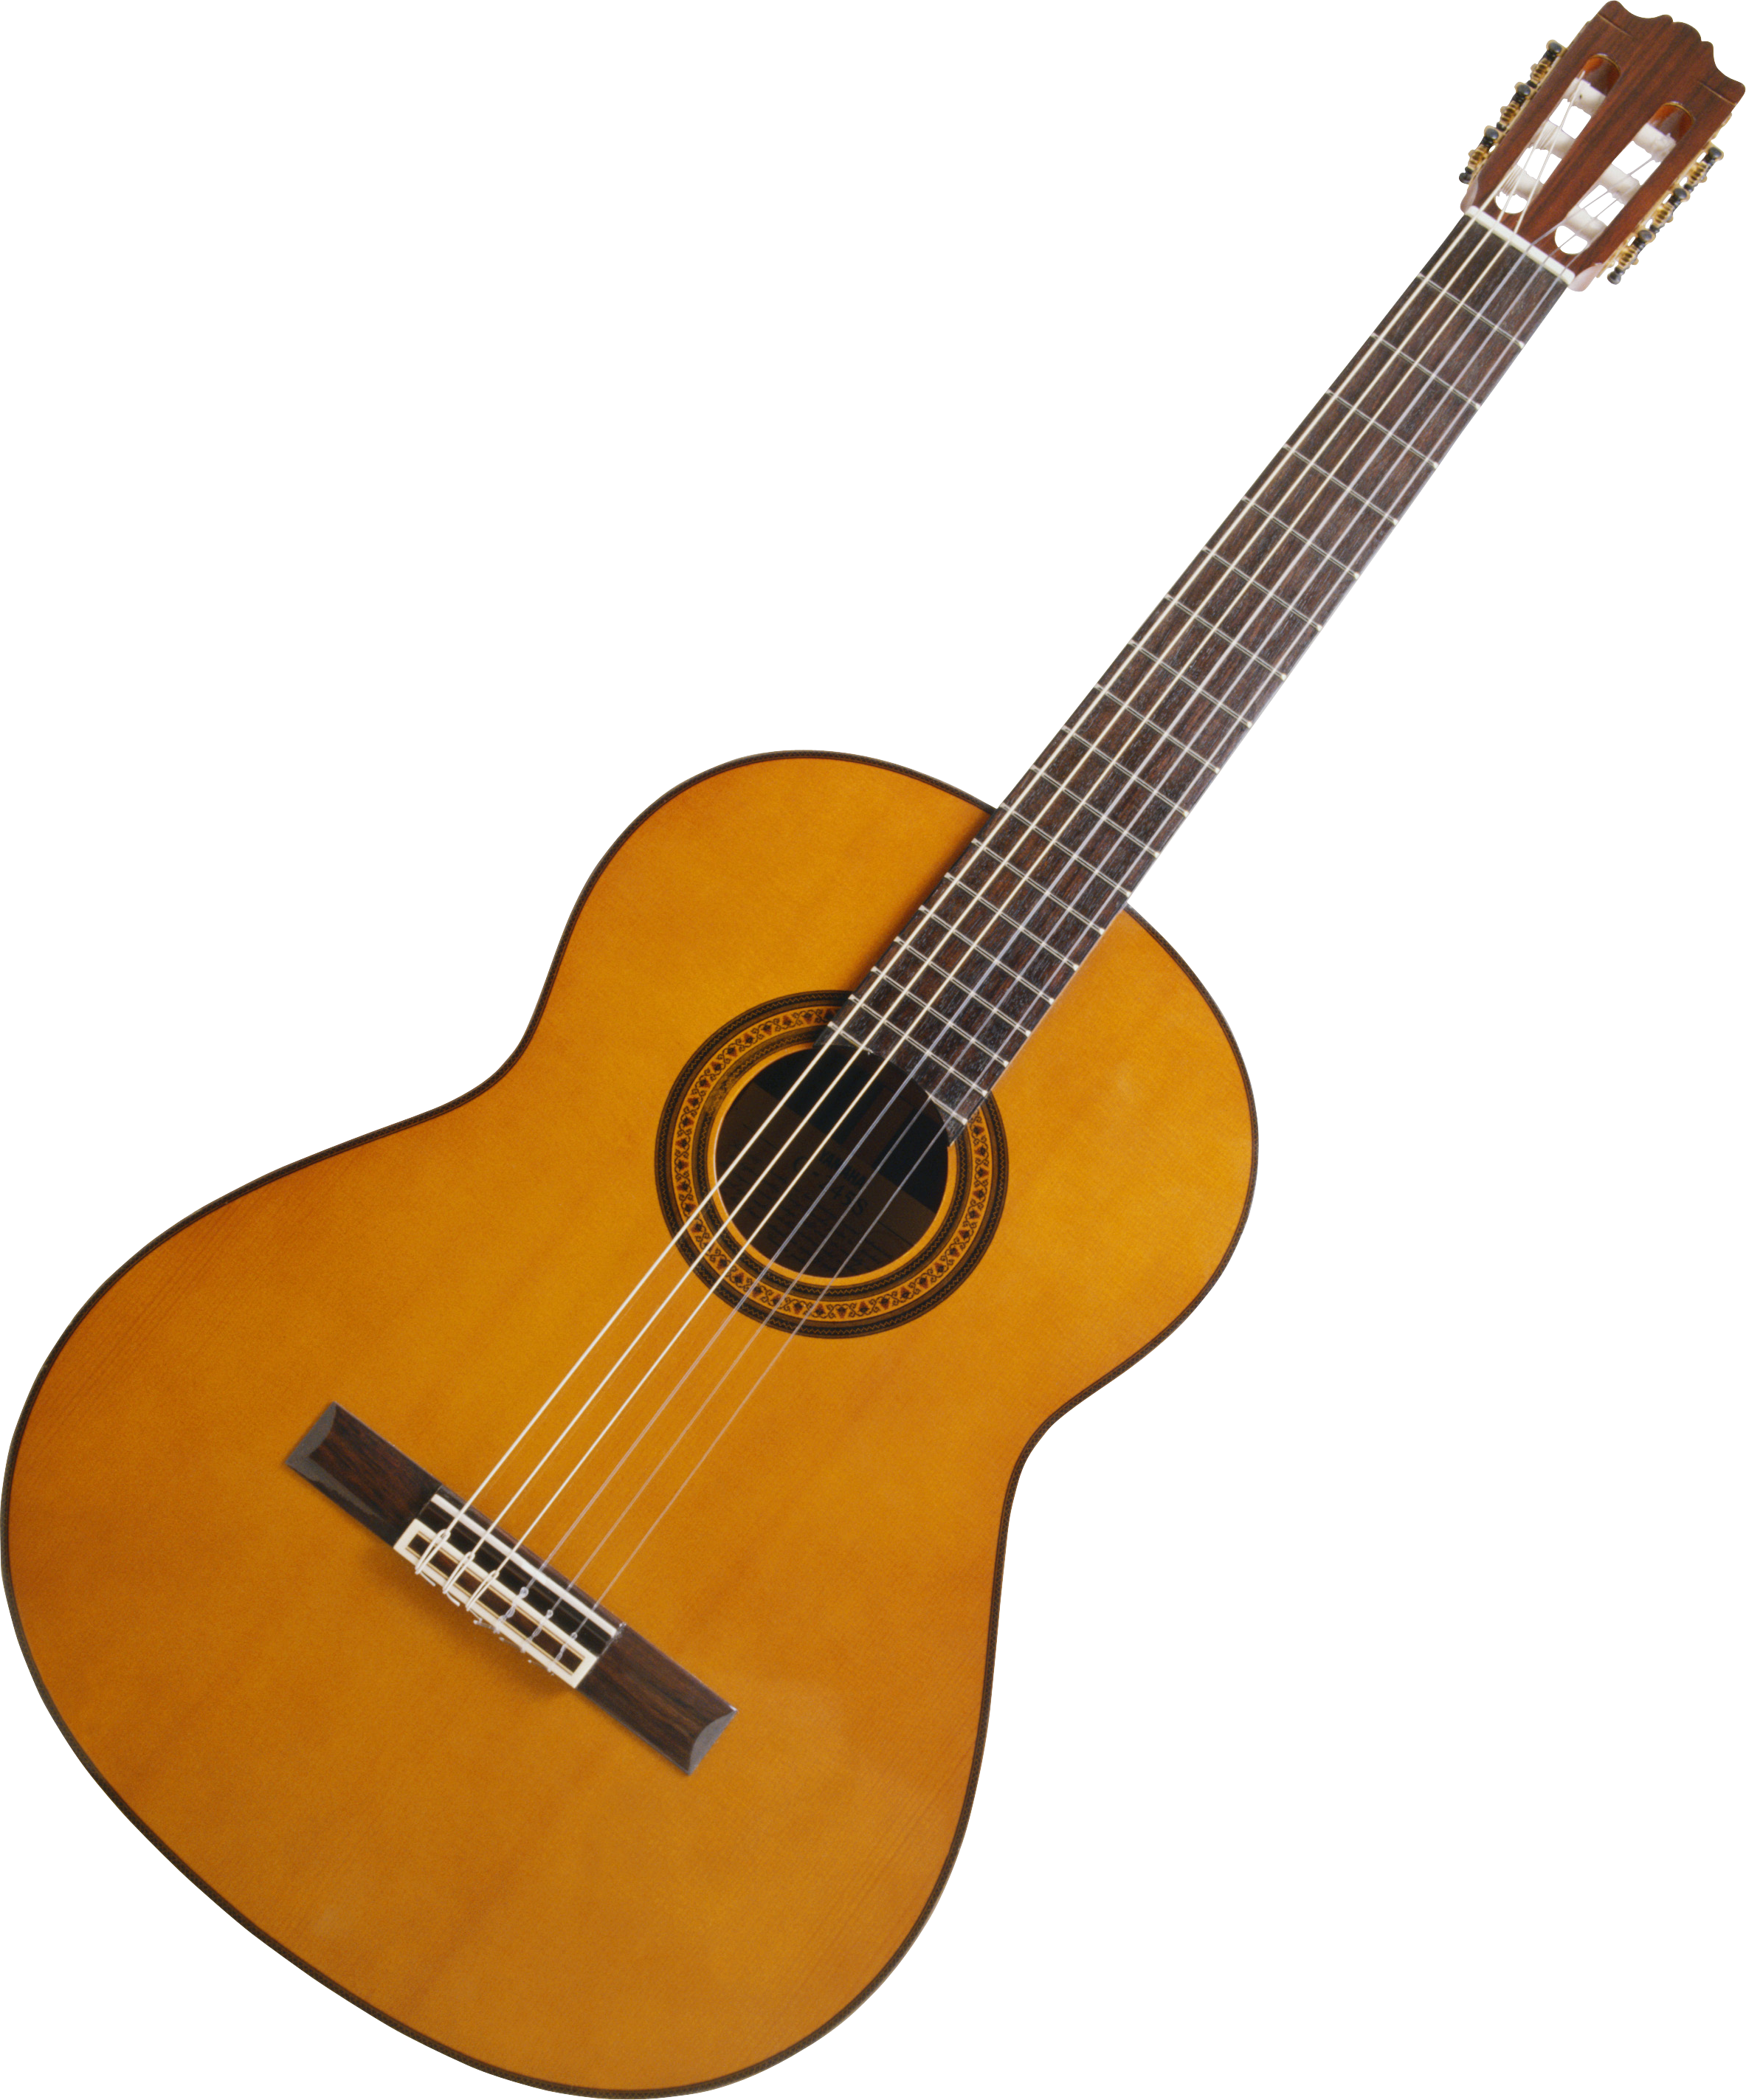 Acoustic Classic Guitar PNG Image